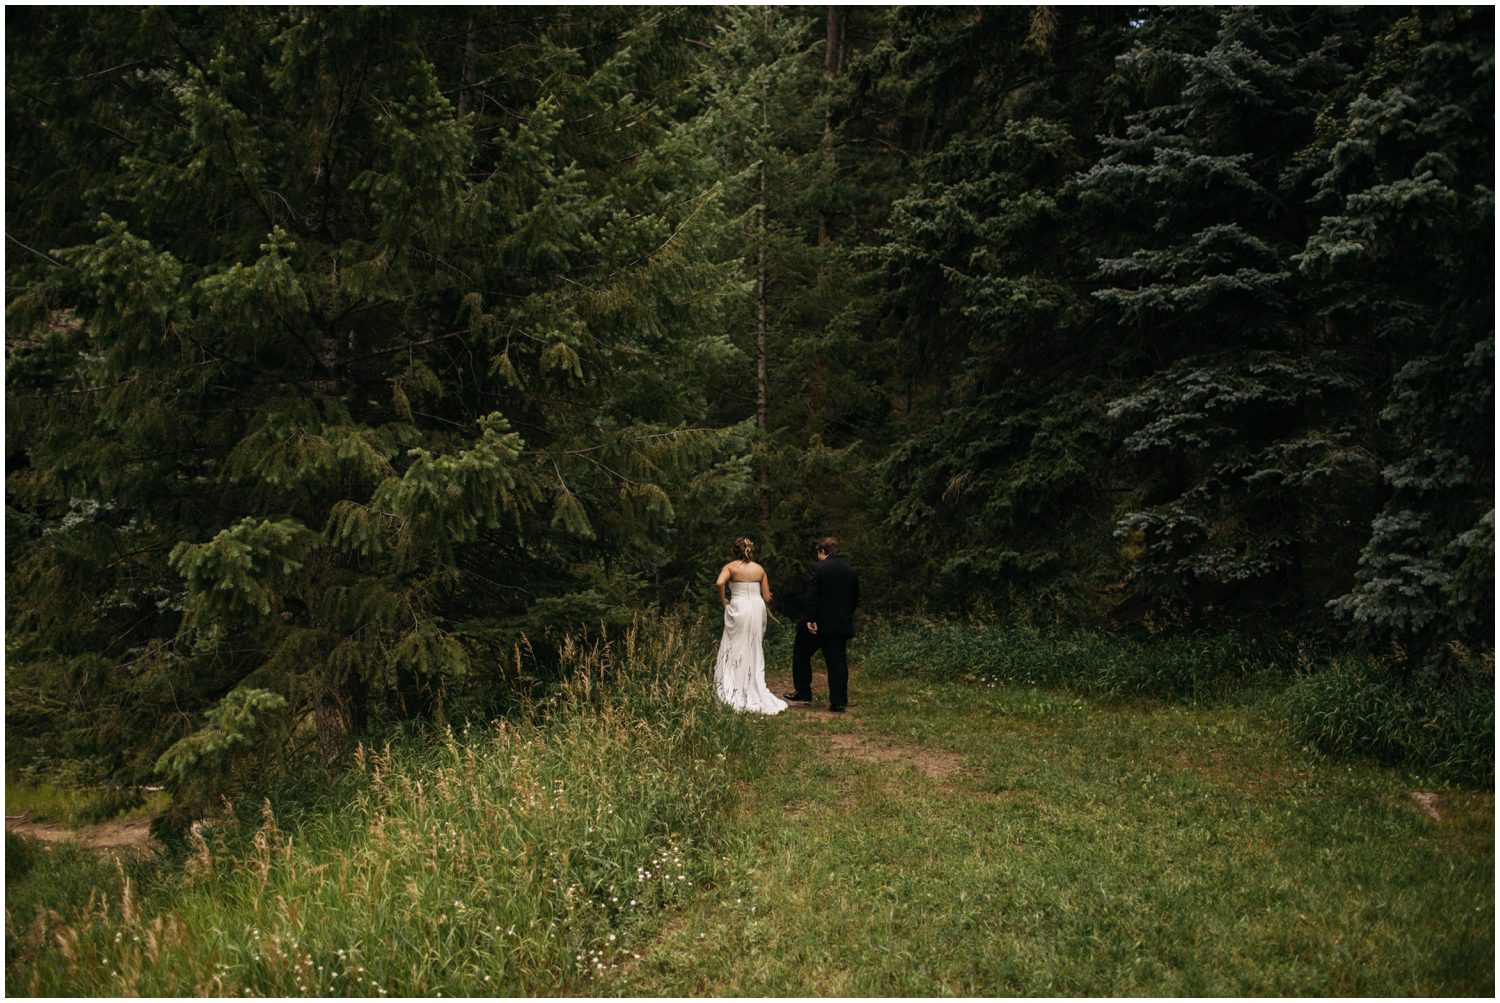 Evergreen Colorado Wedding Photographer, The Church of Transfiguration, Colorado Wedding, Colorado Wedding Inspiration, Colorado, Evergreen Colorado, Wedding Inspiration, Bride and groom, Bride and groom posing, Unposed, Unposed Prompts, Show me your you